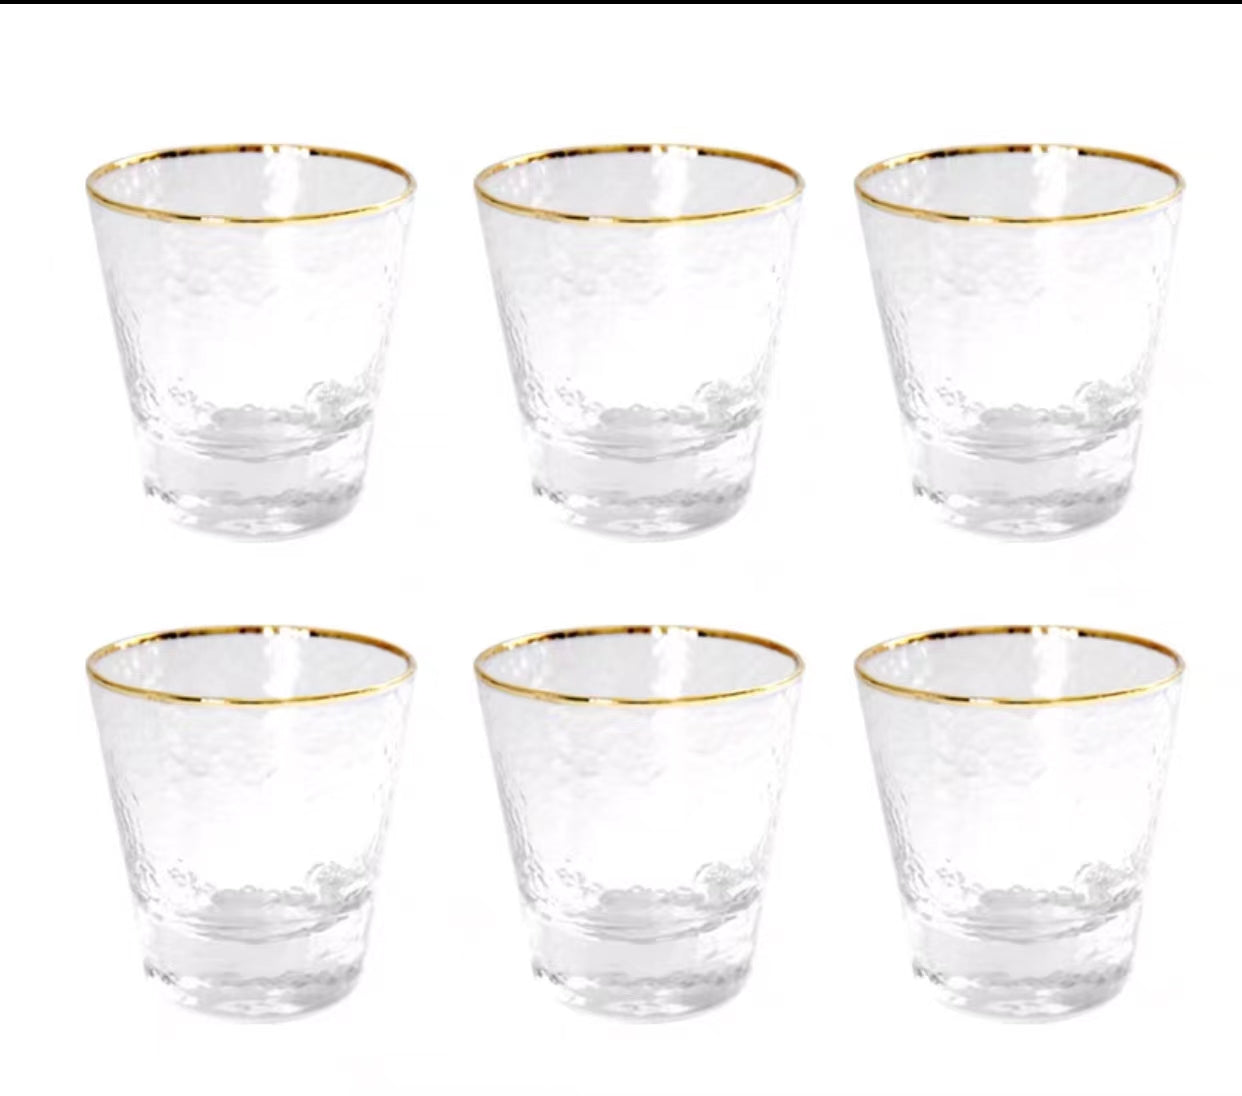 Clear Classy Glass Collection Set - 4 Seasons Home Gadgets